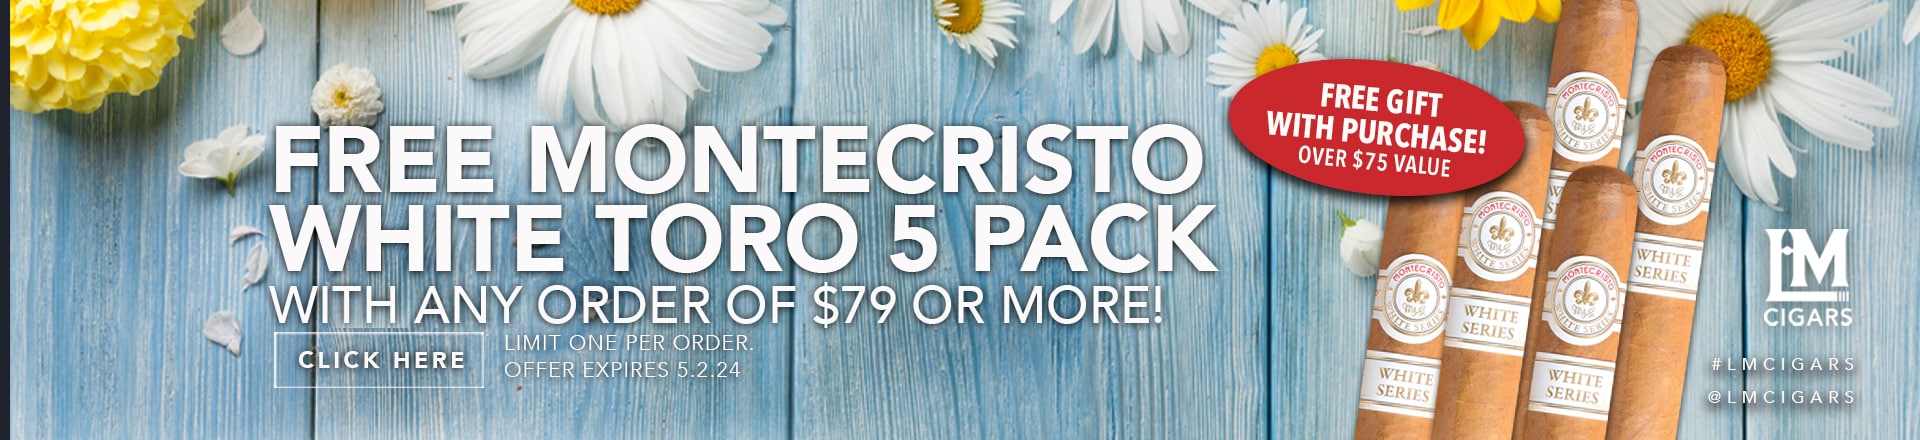 Free Montecristo white toro 5 pack with any purchase of $79 or more